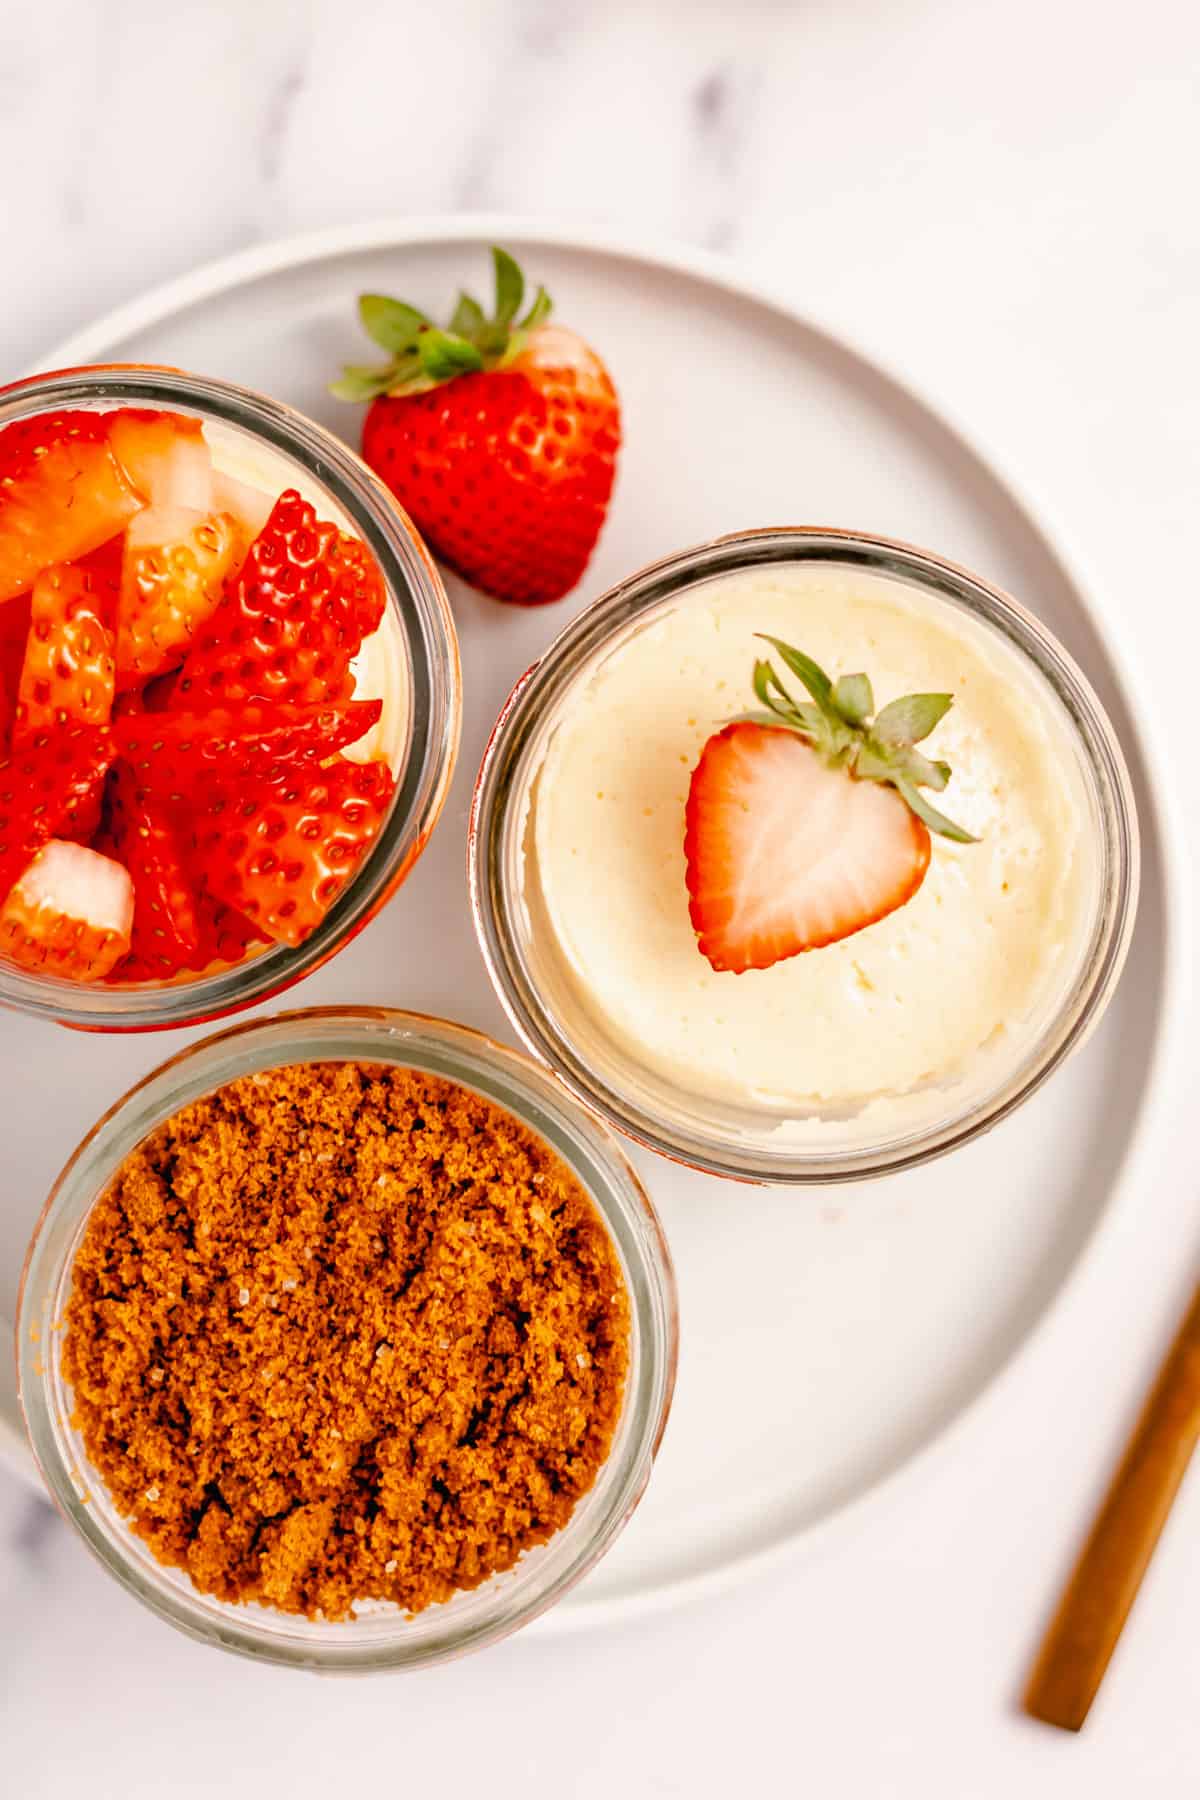 3 instant pot mini cheesecakes, one with crust on top, one with strawberries, and one with diced strawberries on a white plate 